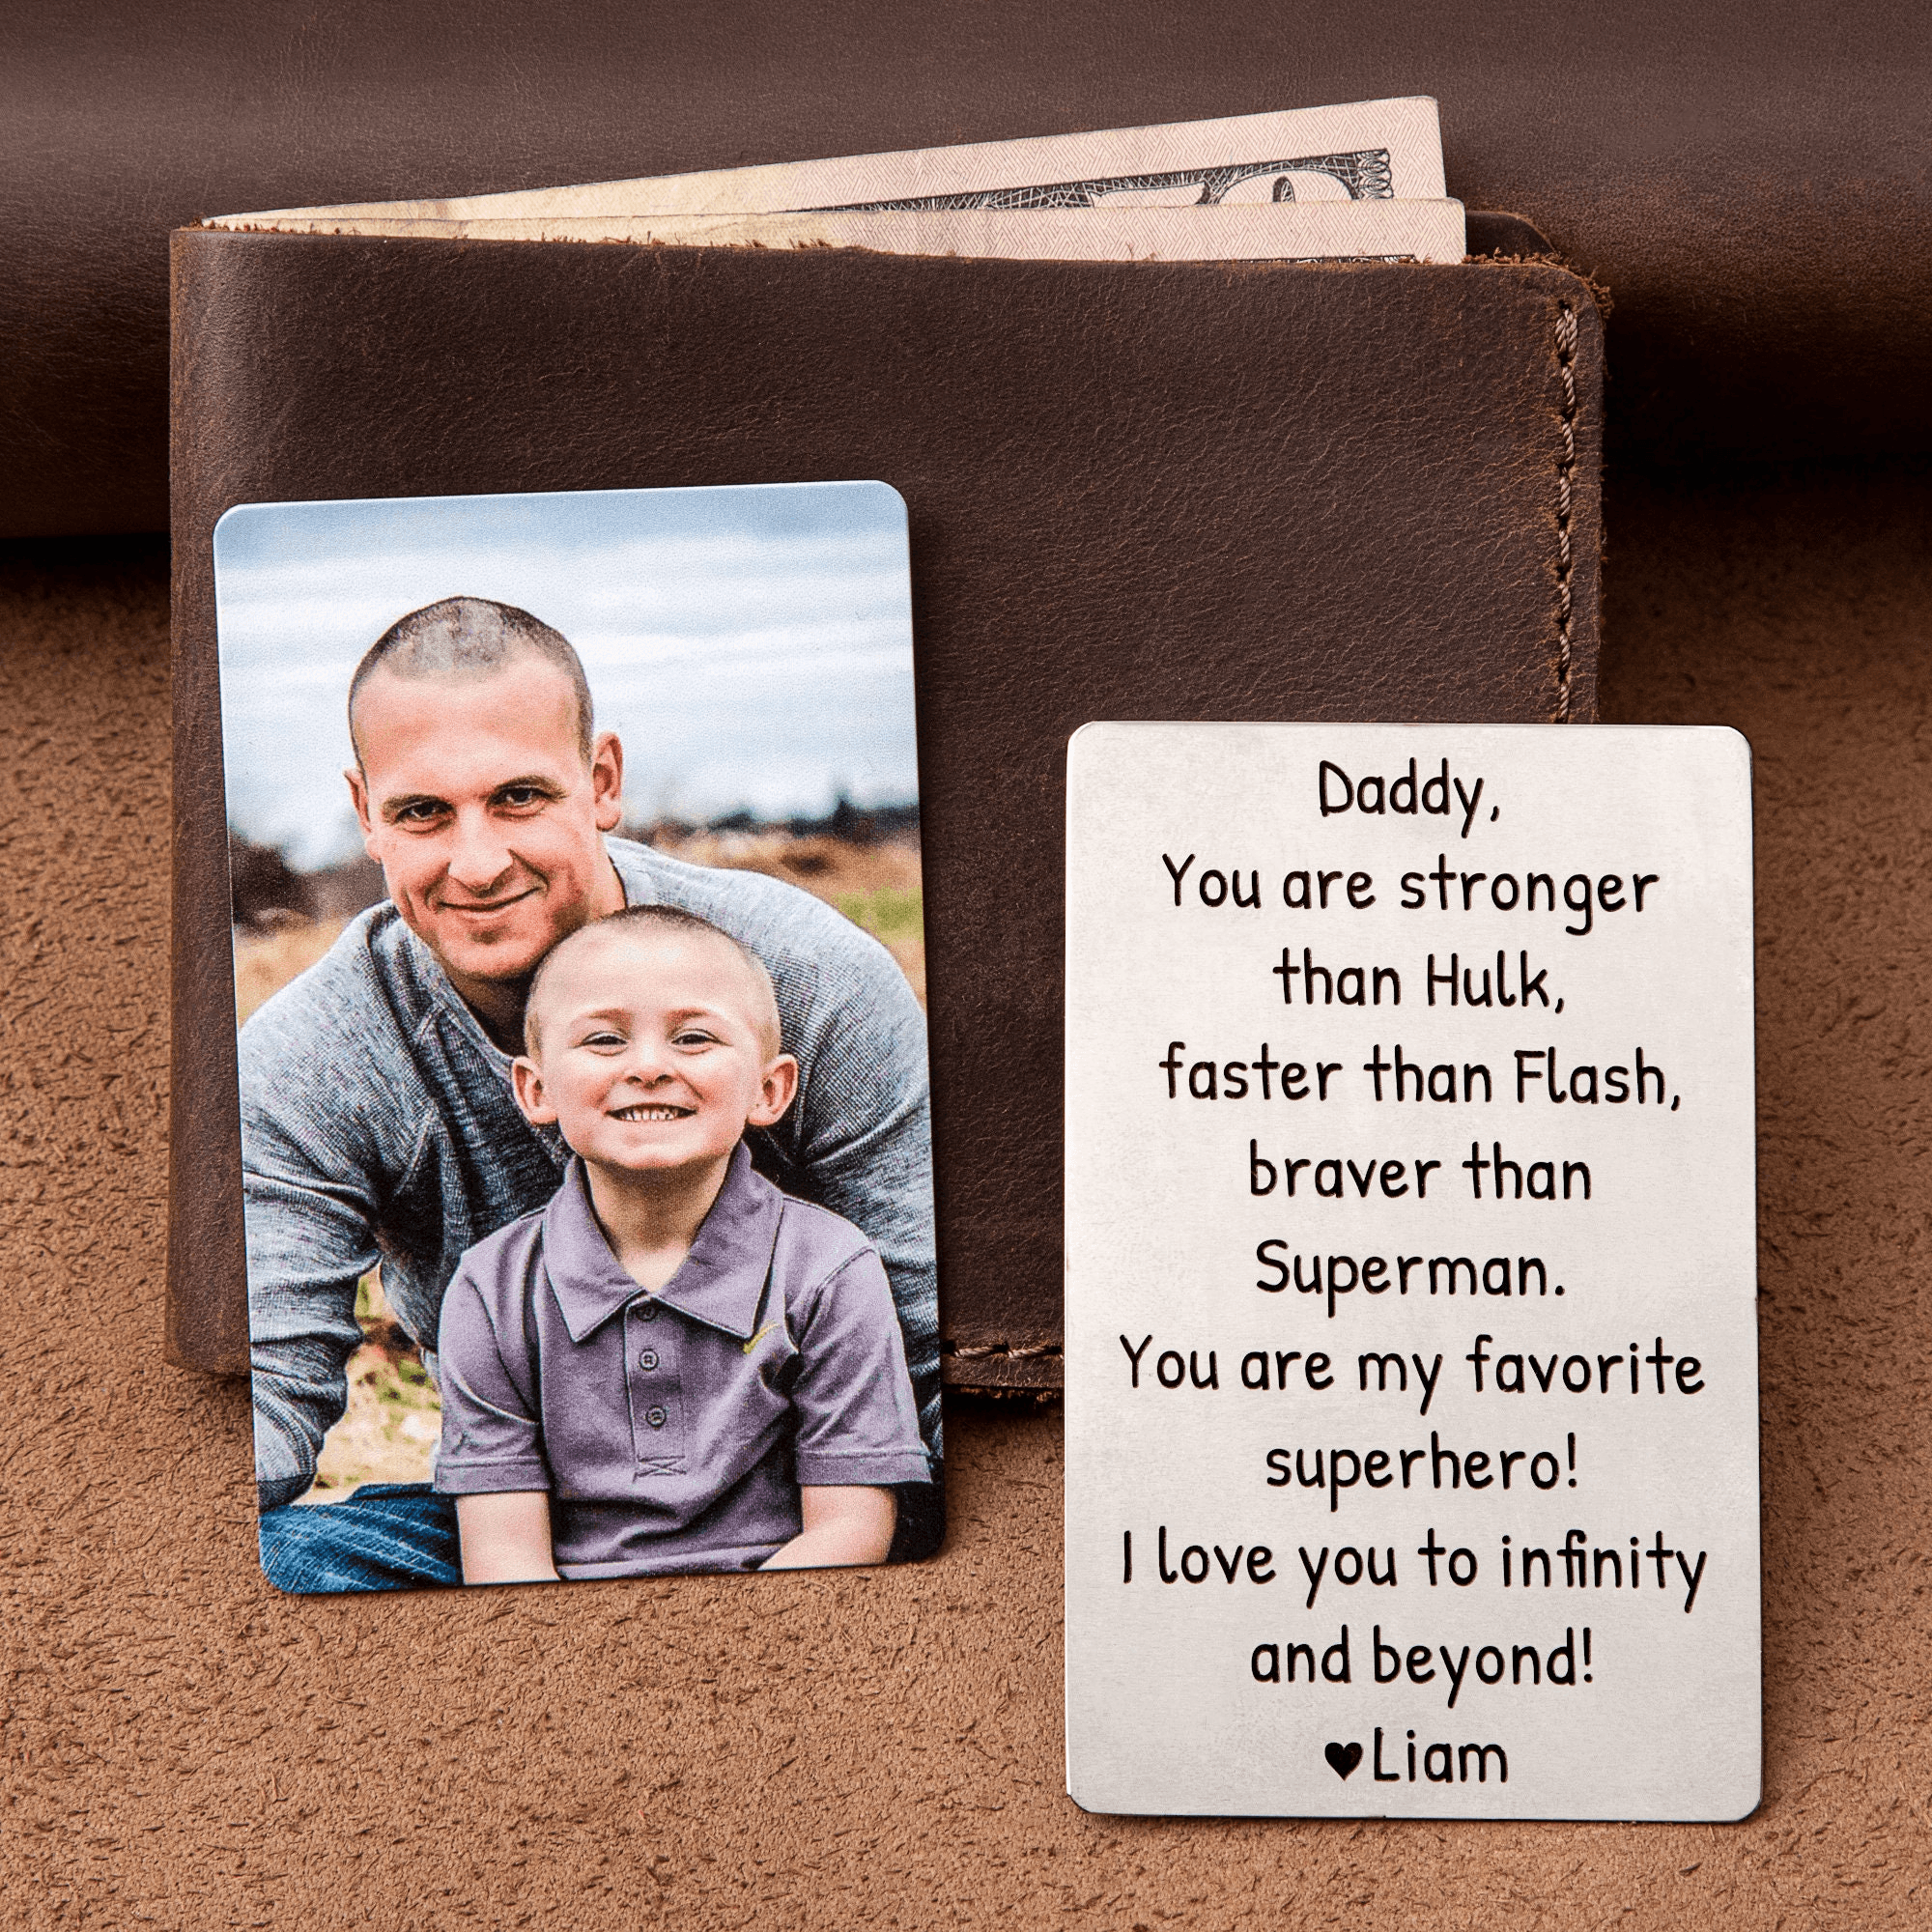 Custom Photo Wallet Insert Card - Personalized Double-sided Aluminum Wallet Card - Father's Day Gift for Family Members Grandma, Grandpa, Dad, Mom, Boyfriend, Girlfriend, Husband, Wife - Suzitee Store